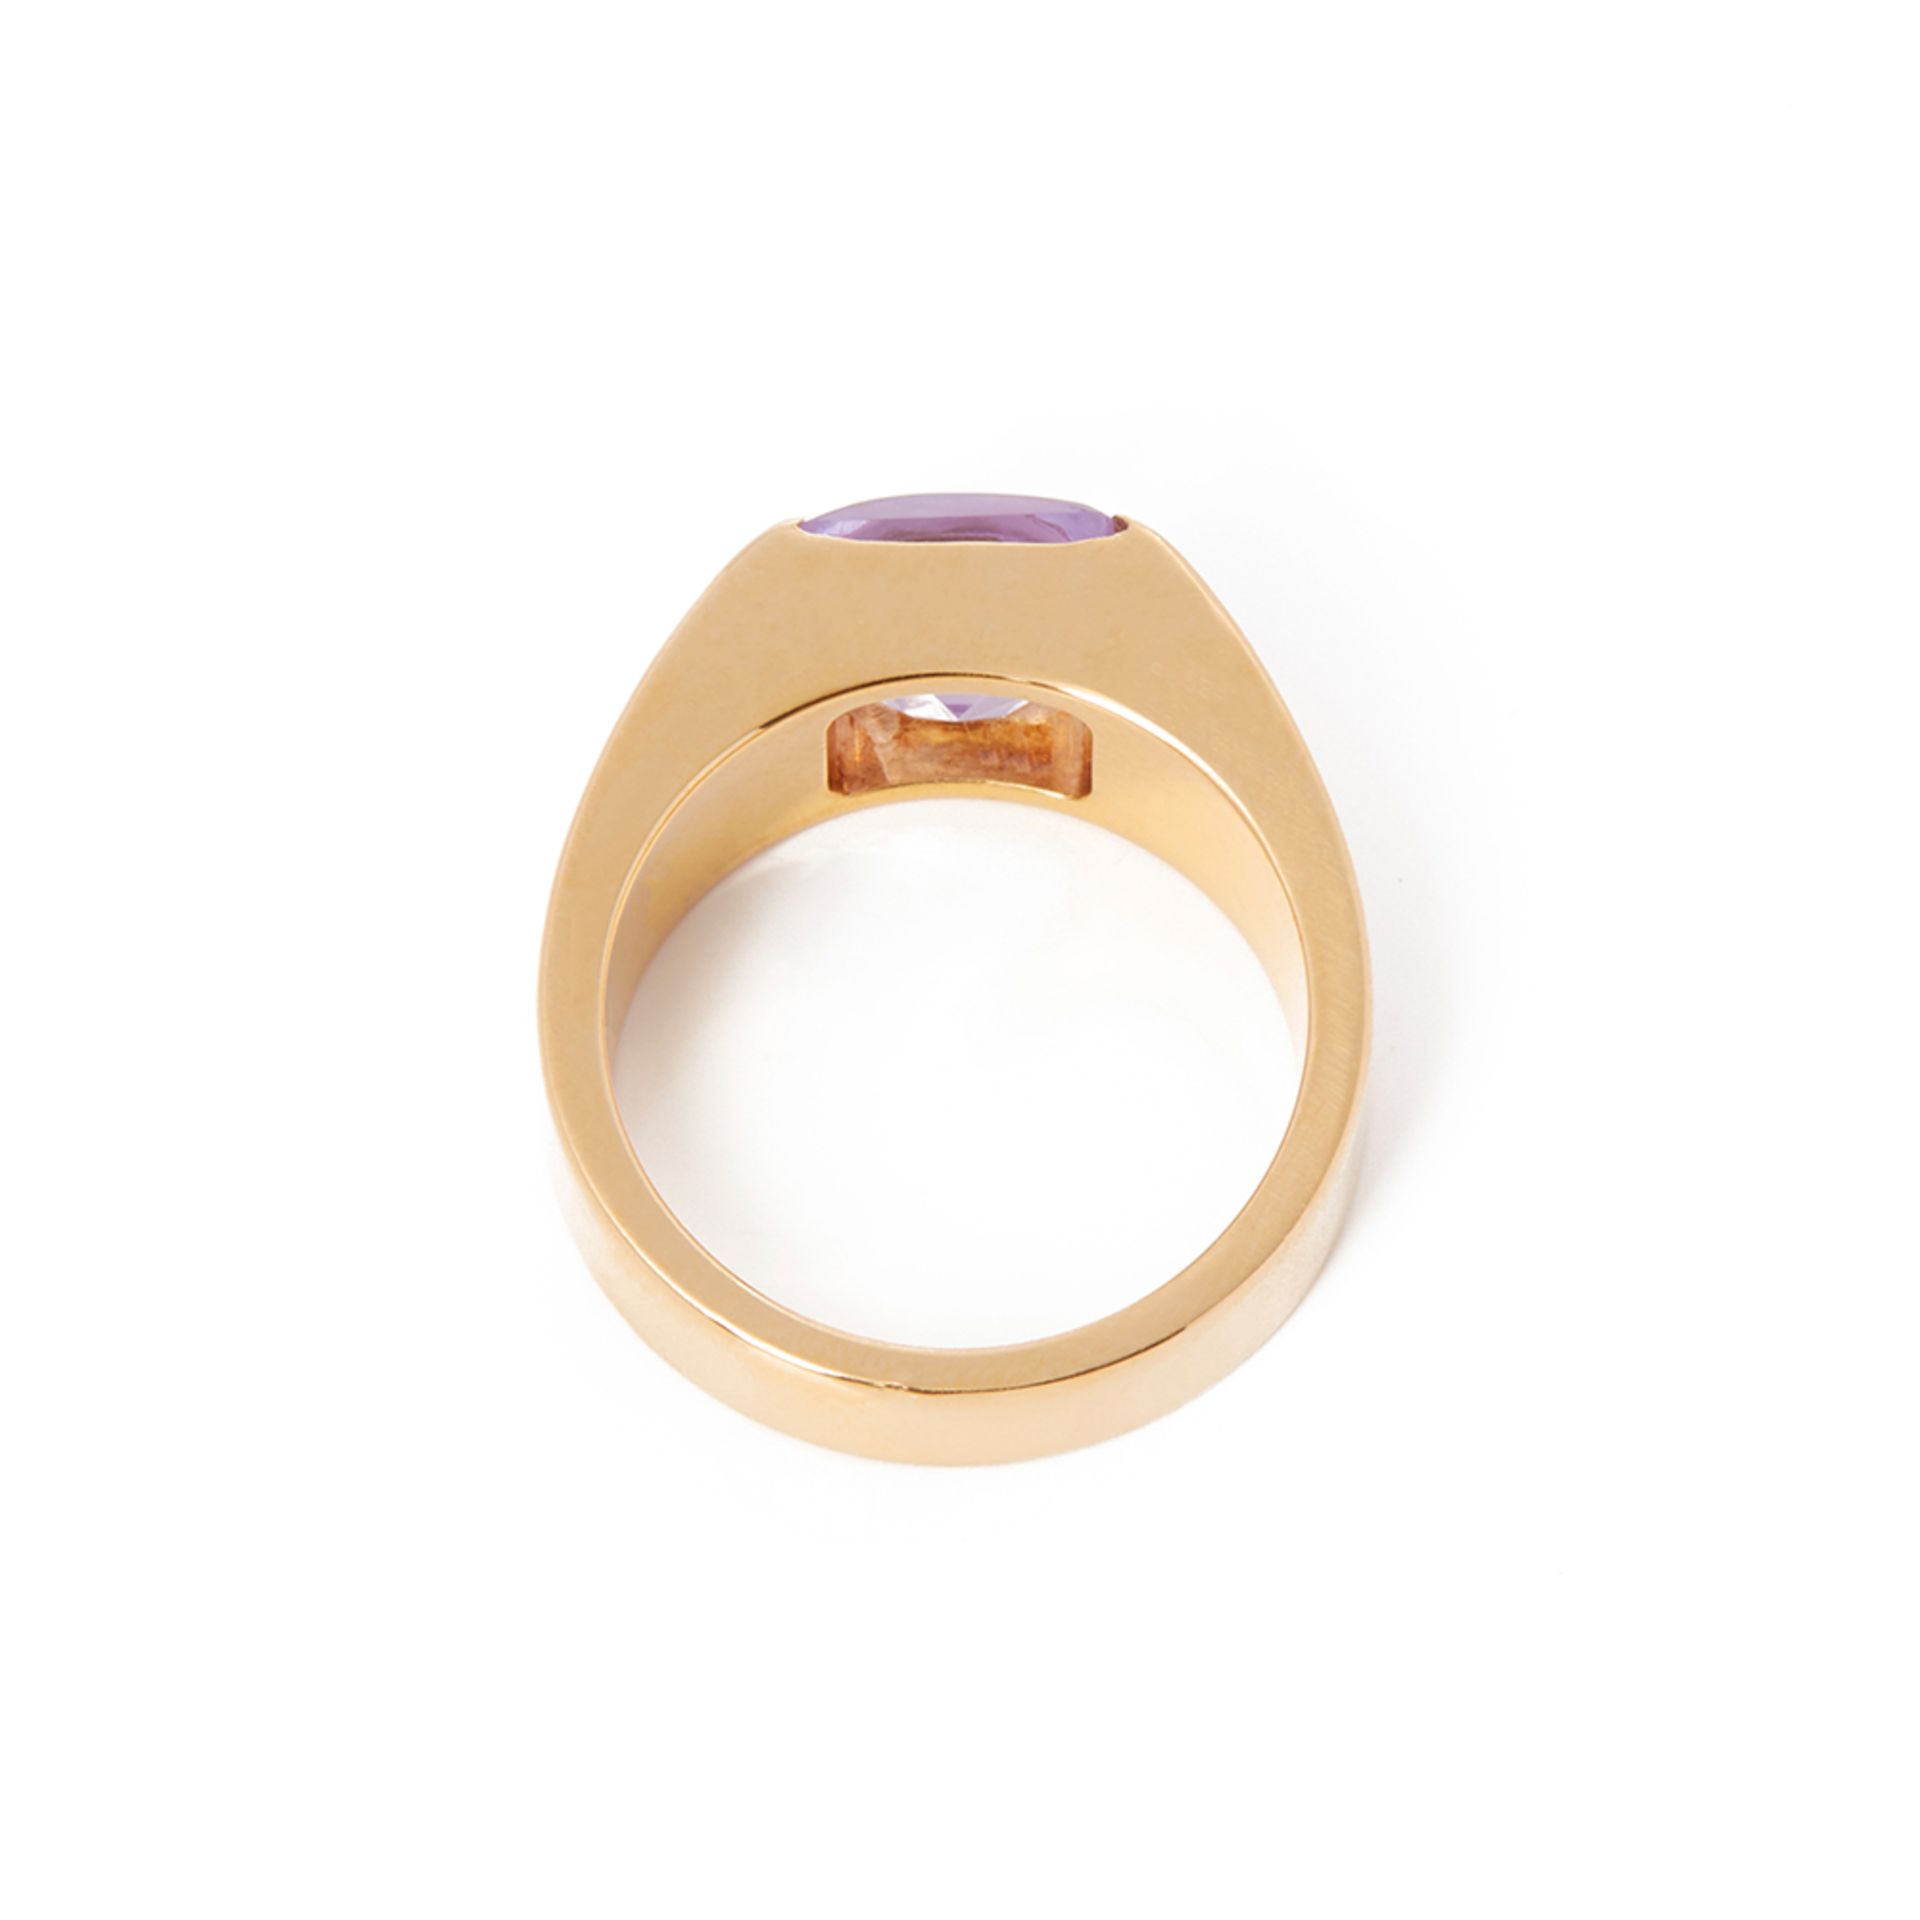 Cartier 18k Yellow Gold Amethyst Tank Ring - Image 5 of 6